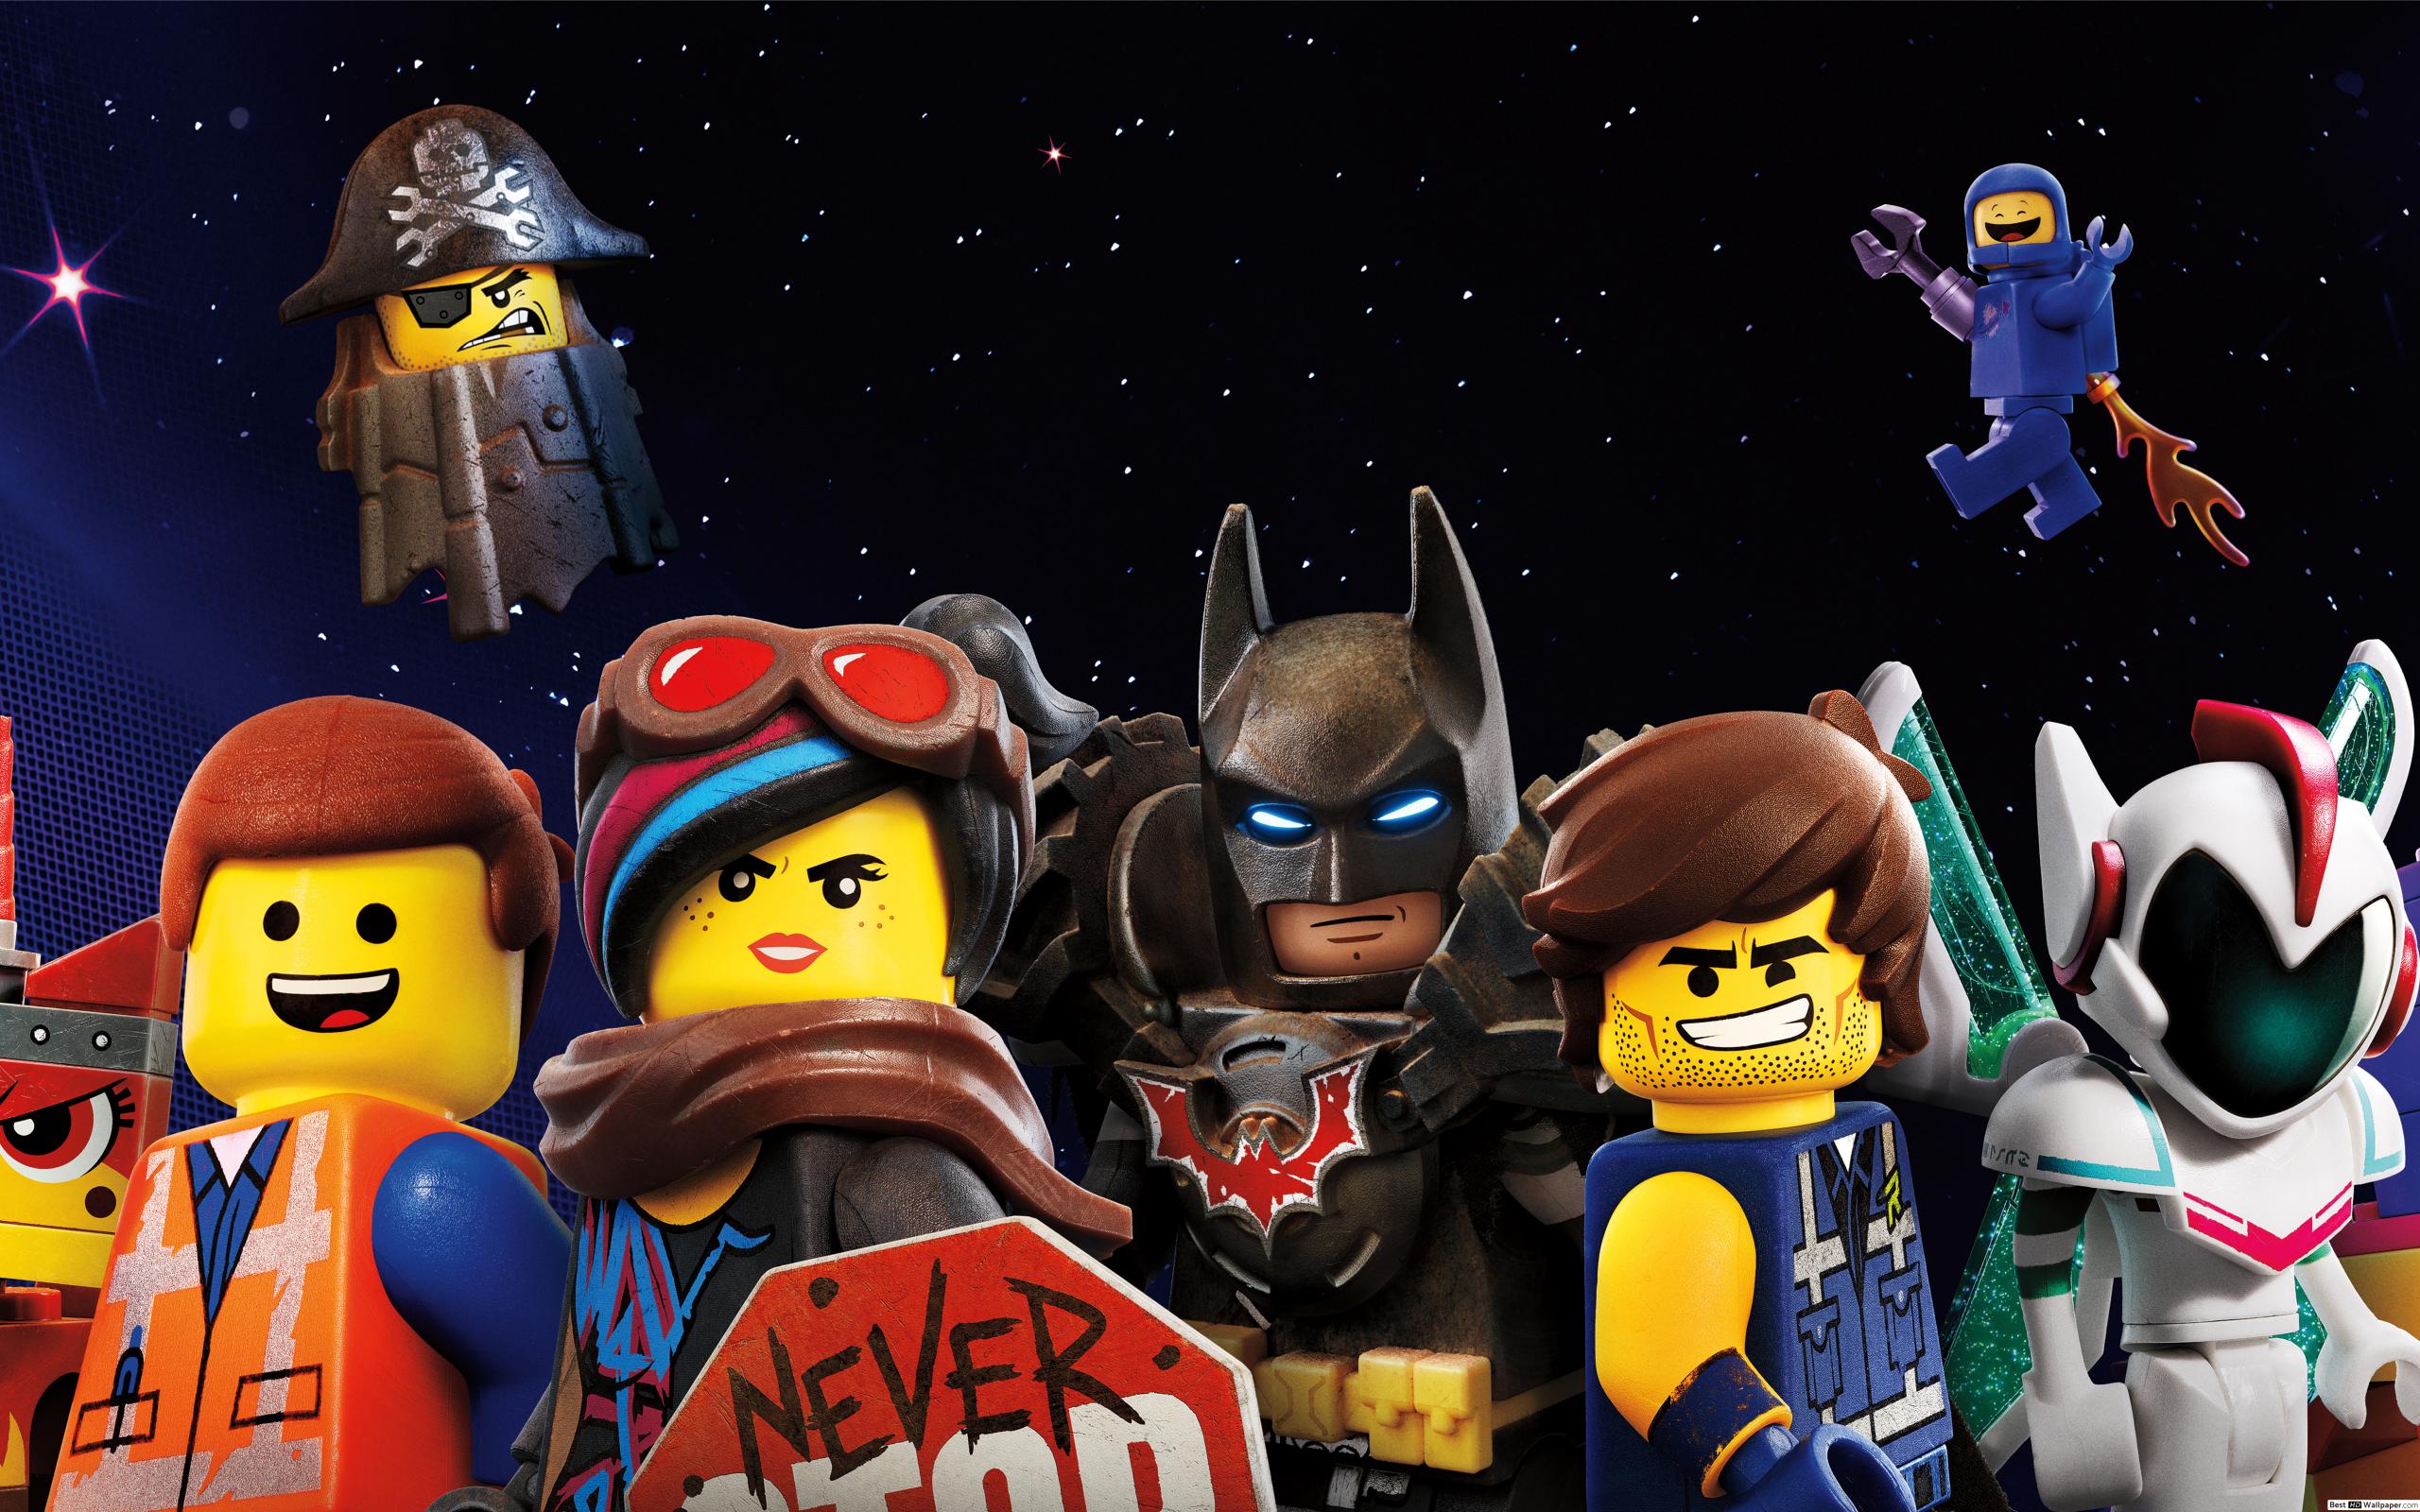 2560x1600 The Lego Movie 2 Hd Wallpaper Download